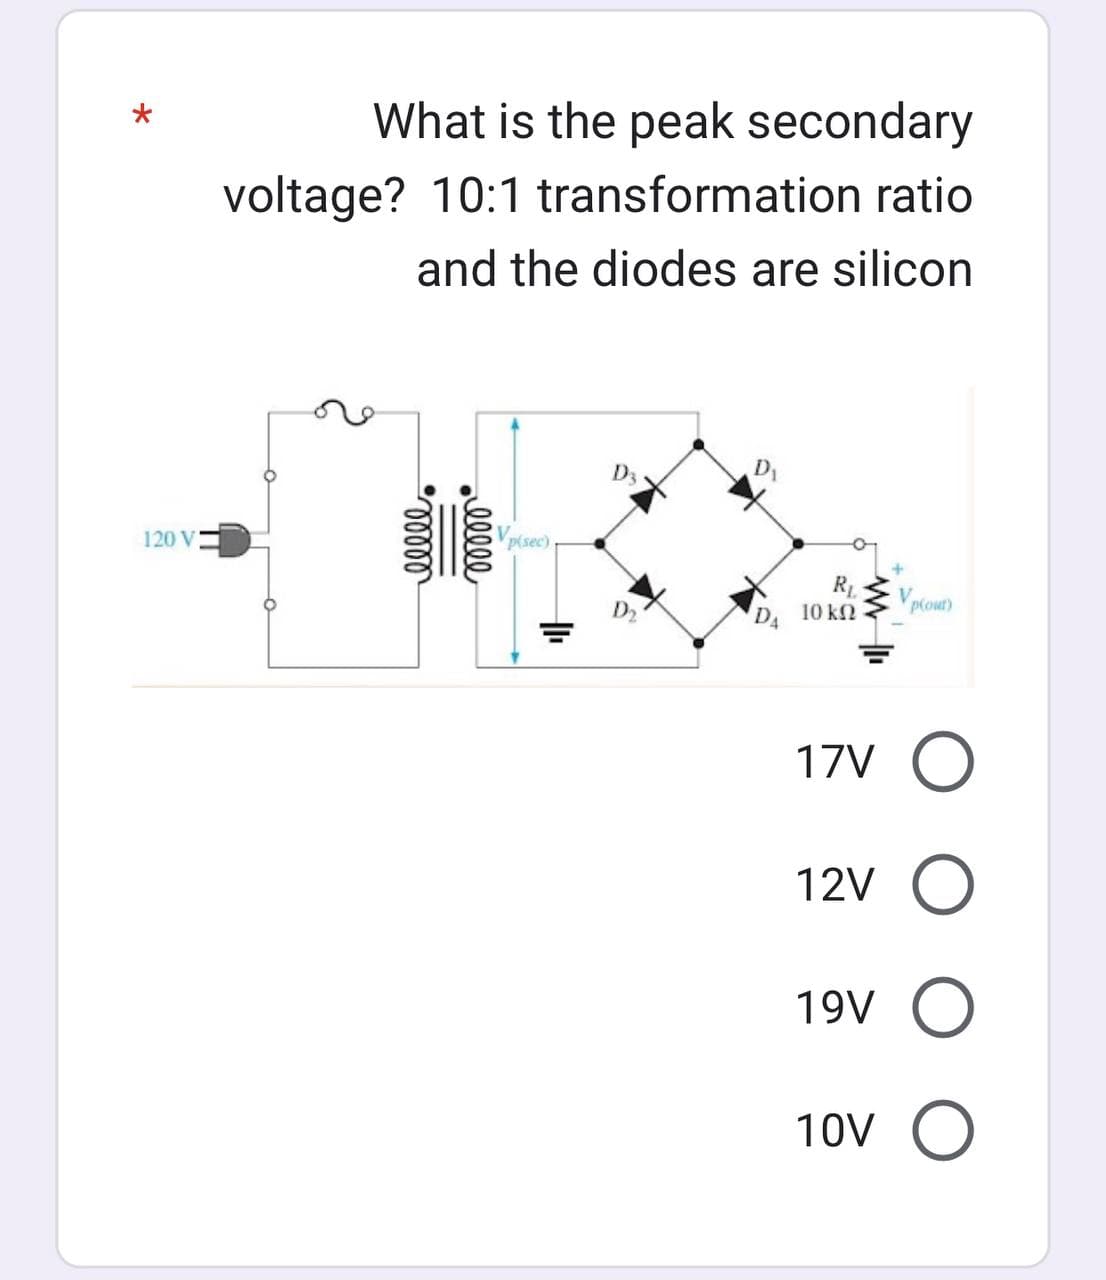 120 V
What is the peak secondary
voltage? 10:1 transformation ratio
and the diodes are silicon
ellel
lllll
Vp(sec)
D3
D₁
R₁
10 ΚΩ
V
plour)
17V O
12V O
19V O
τον Ο